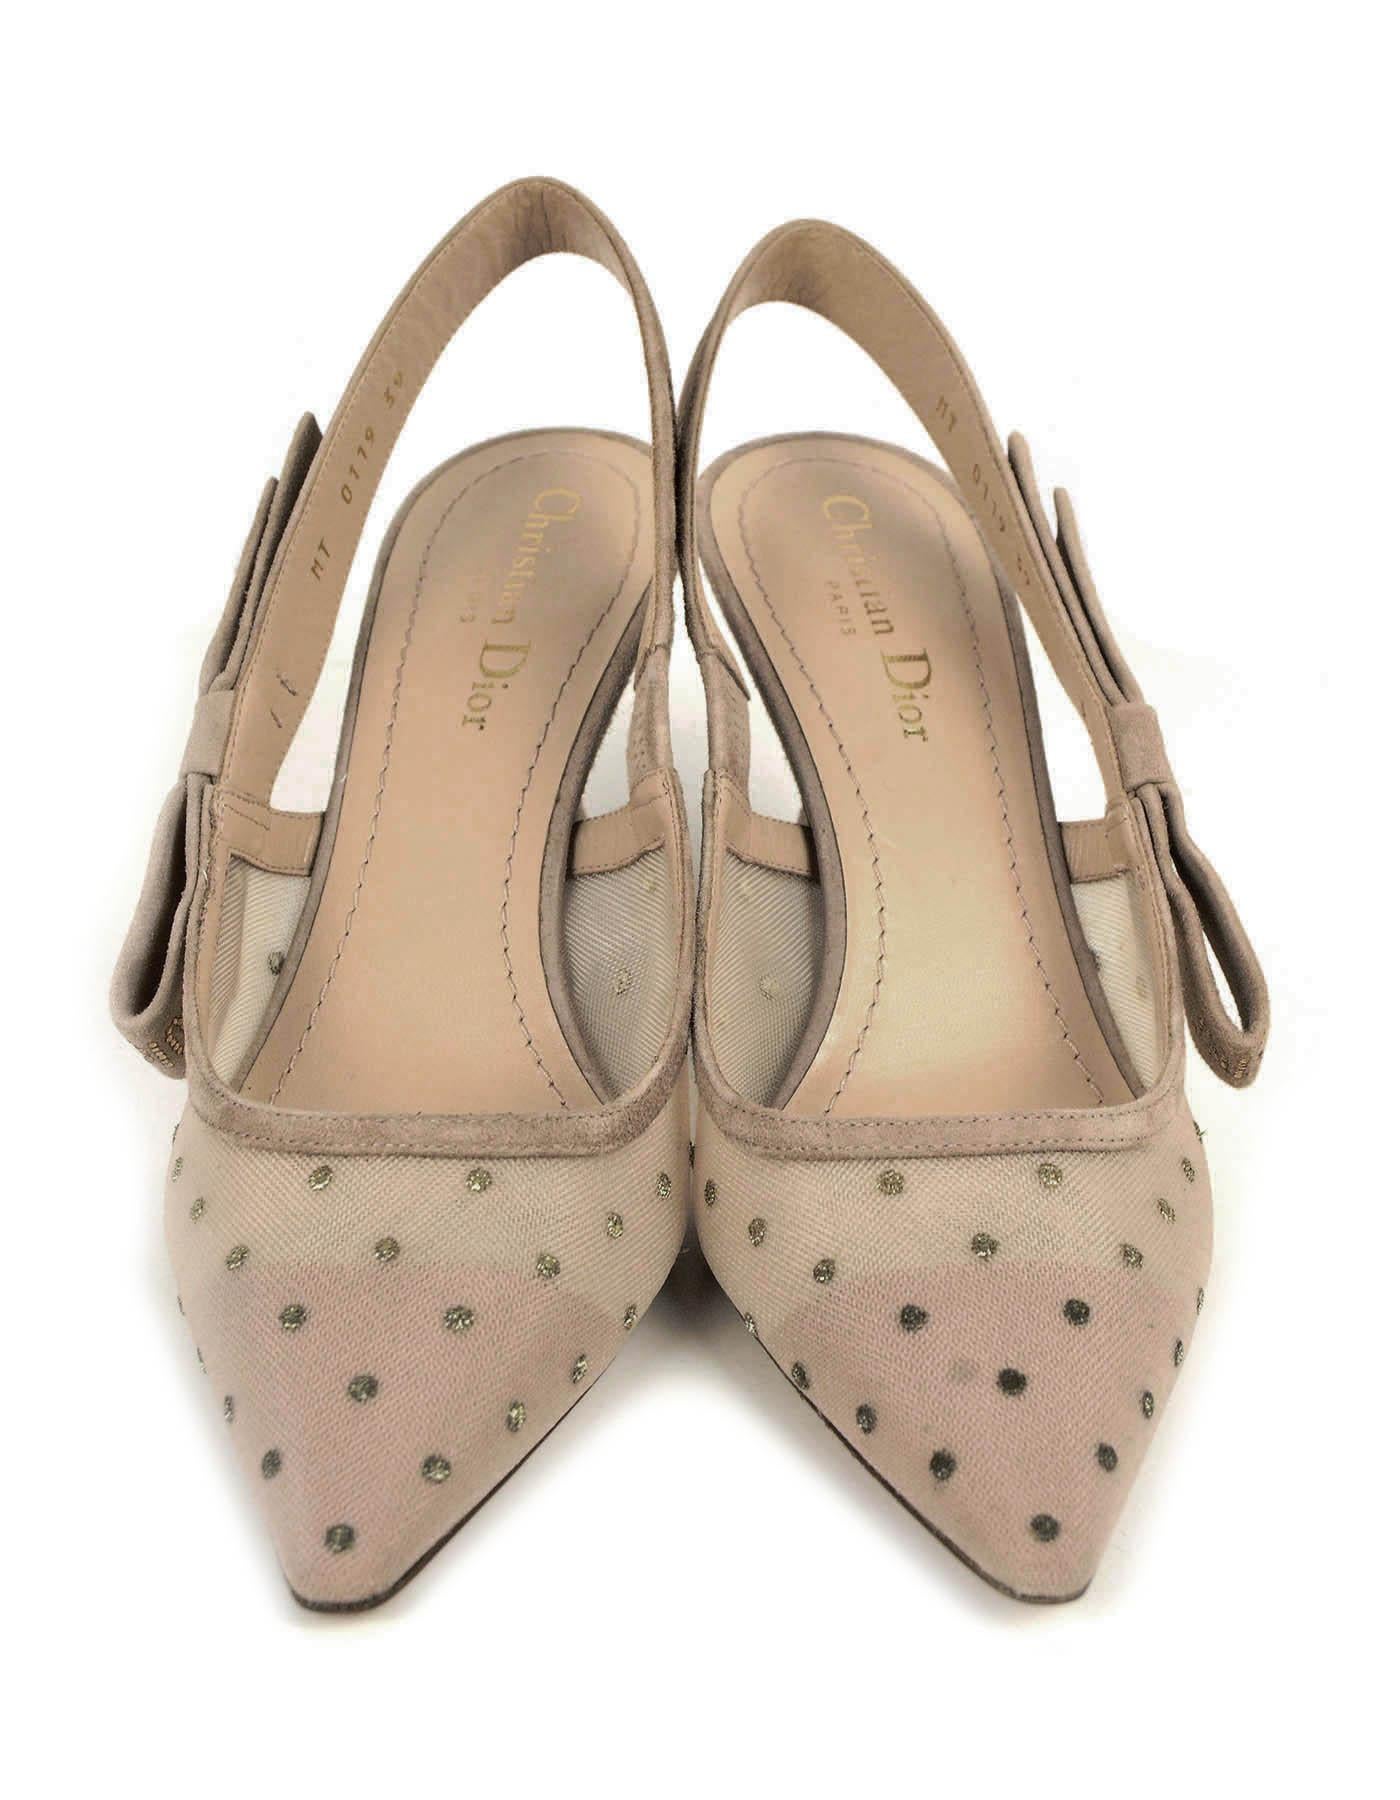 Christian Dior Nude Plumetis J’ADIOR Slingback Pumps

Made In: Italy
Color: Nude
Materials: Suede & crystals
Closure/Opening: Slingbacks
Overall Condition: New with the exception of a small mark to outer shoe from improper storage (see last